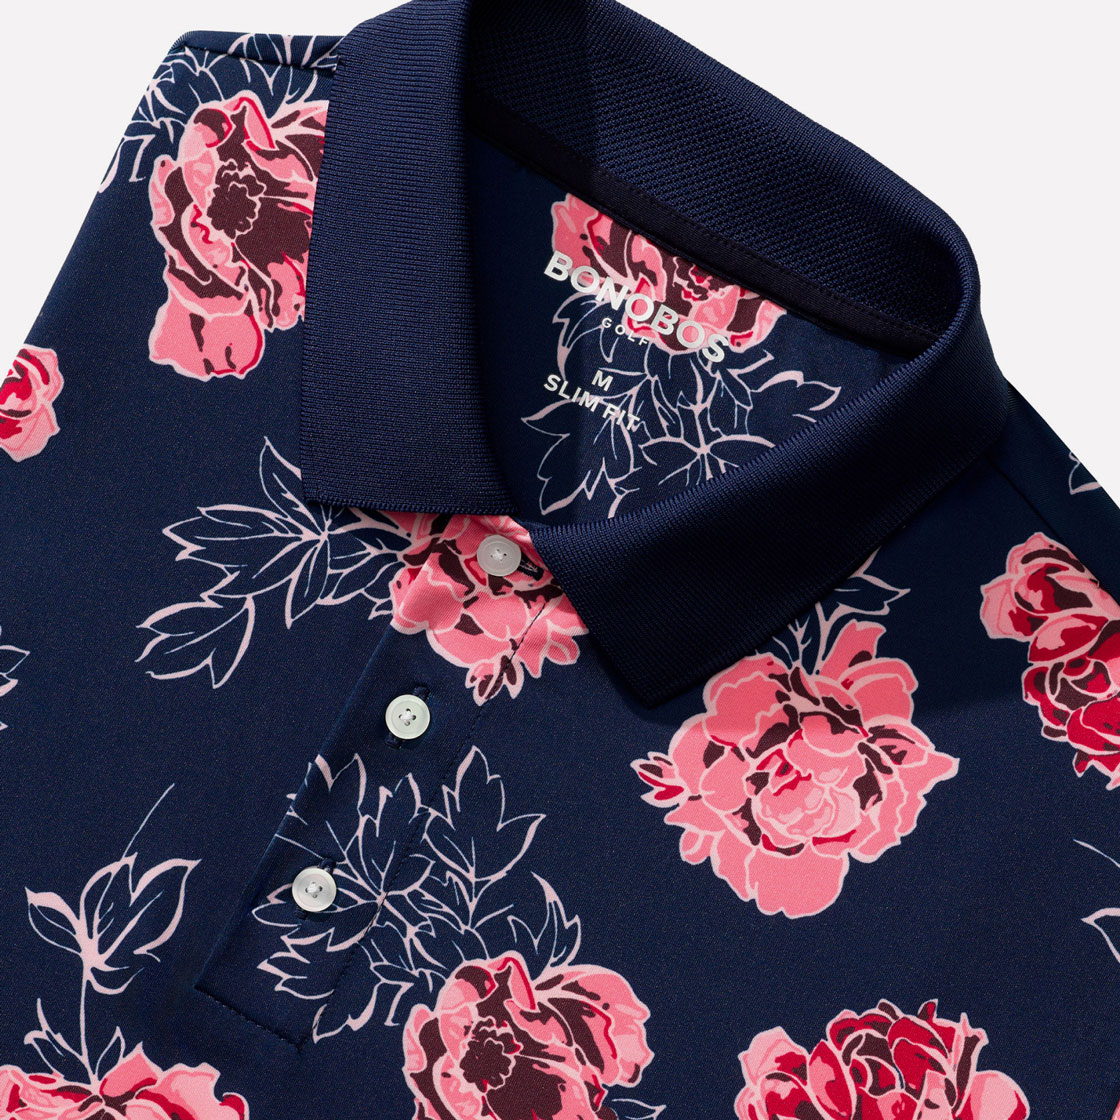 Ready to rock a floral polo like Justin Rose? Here are 7 perfect options